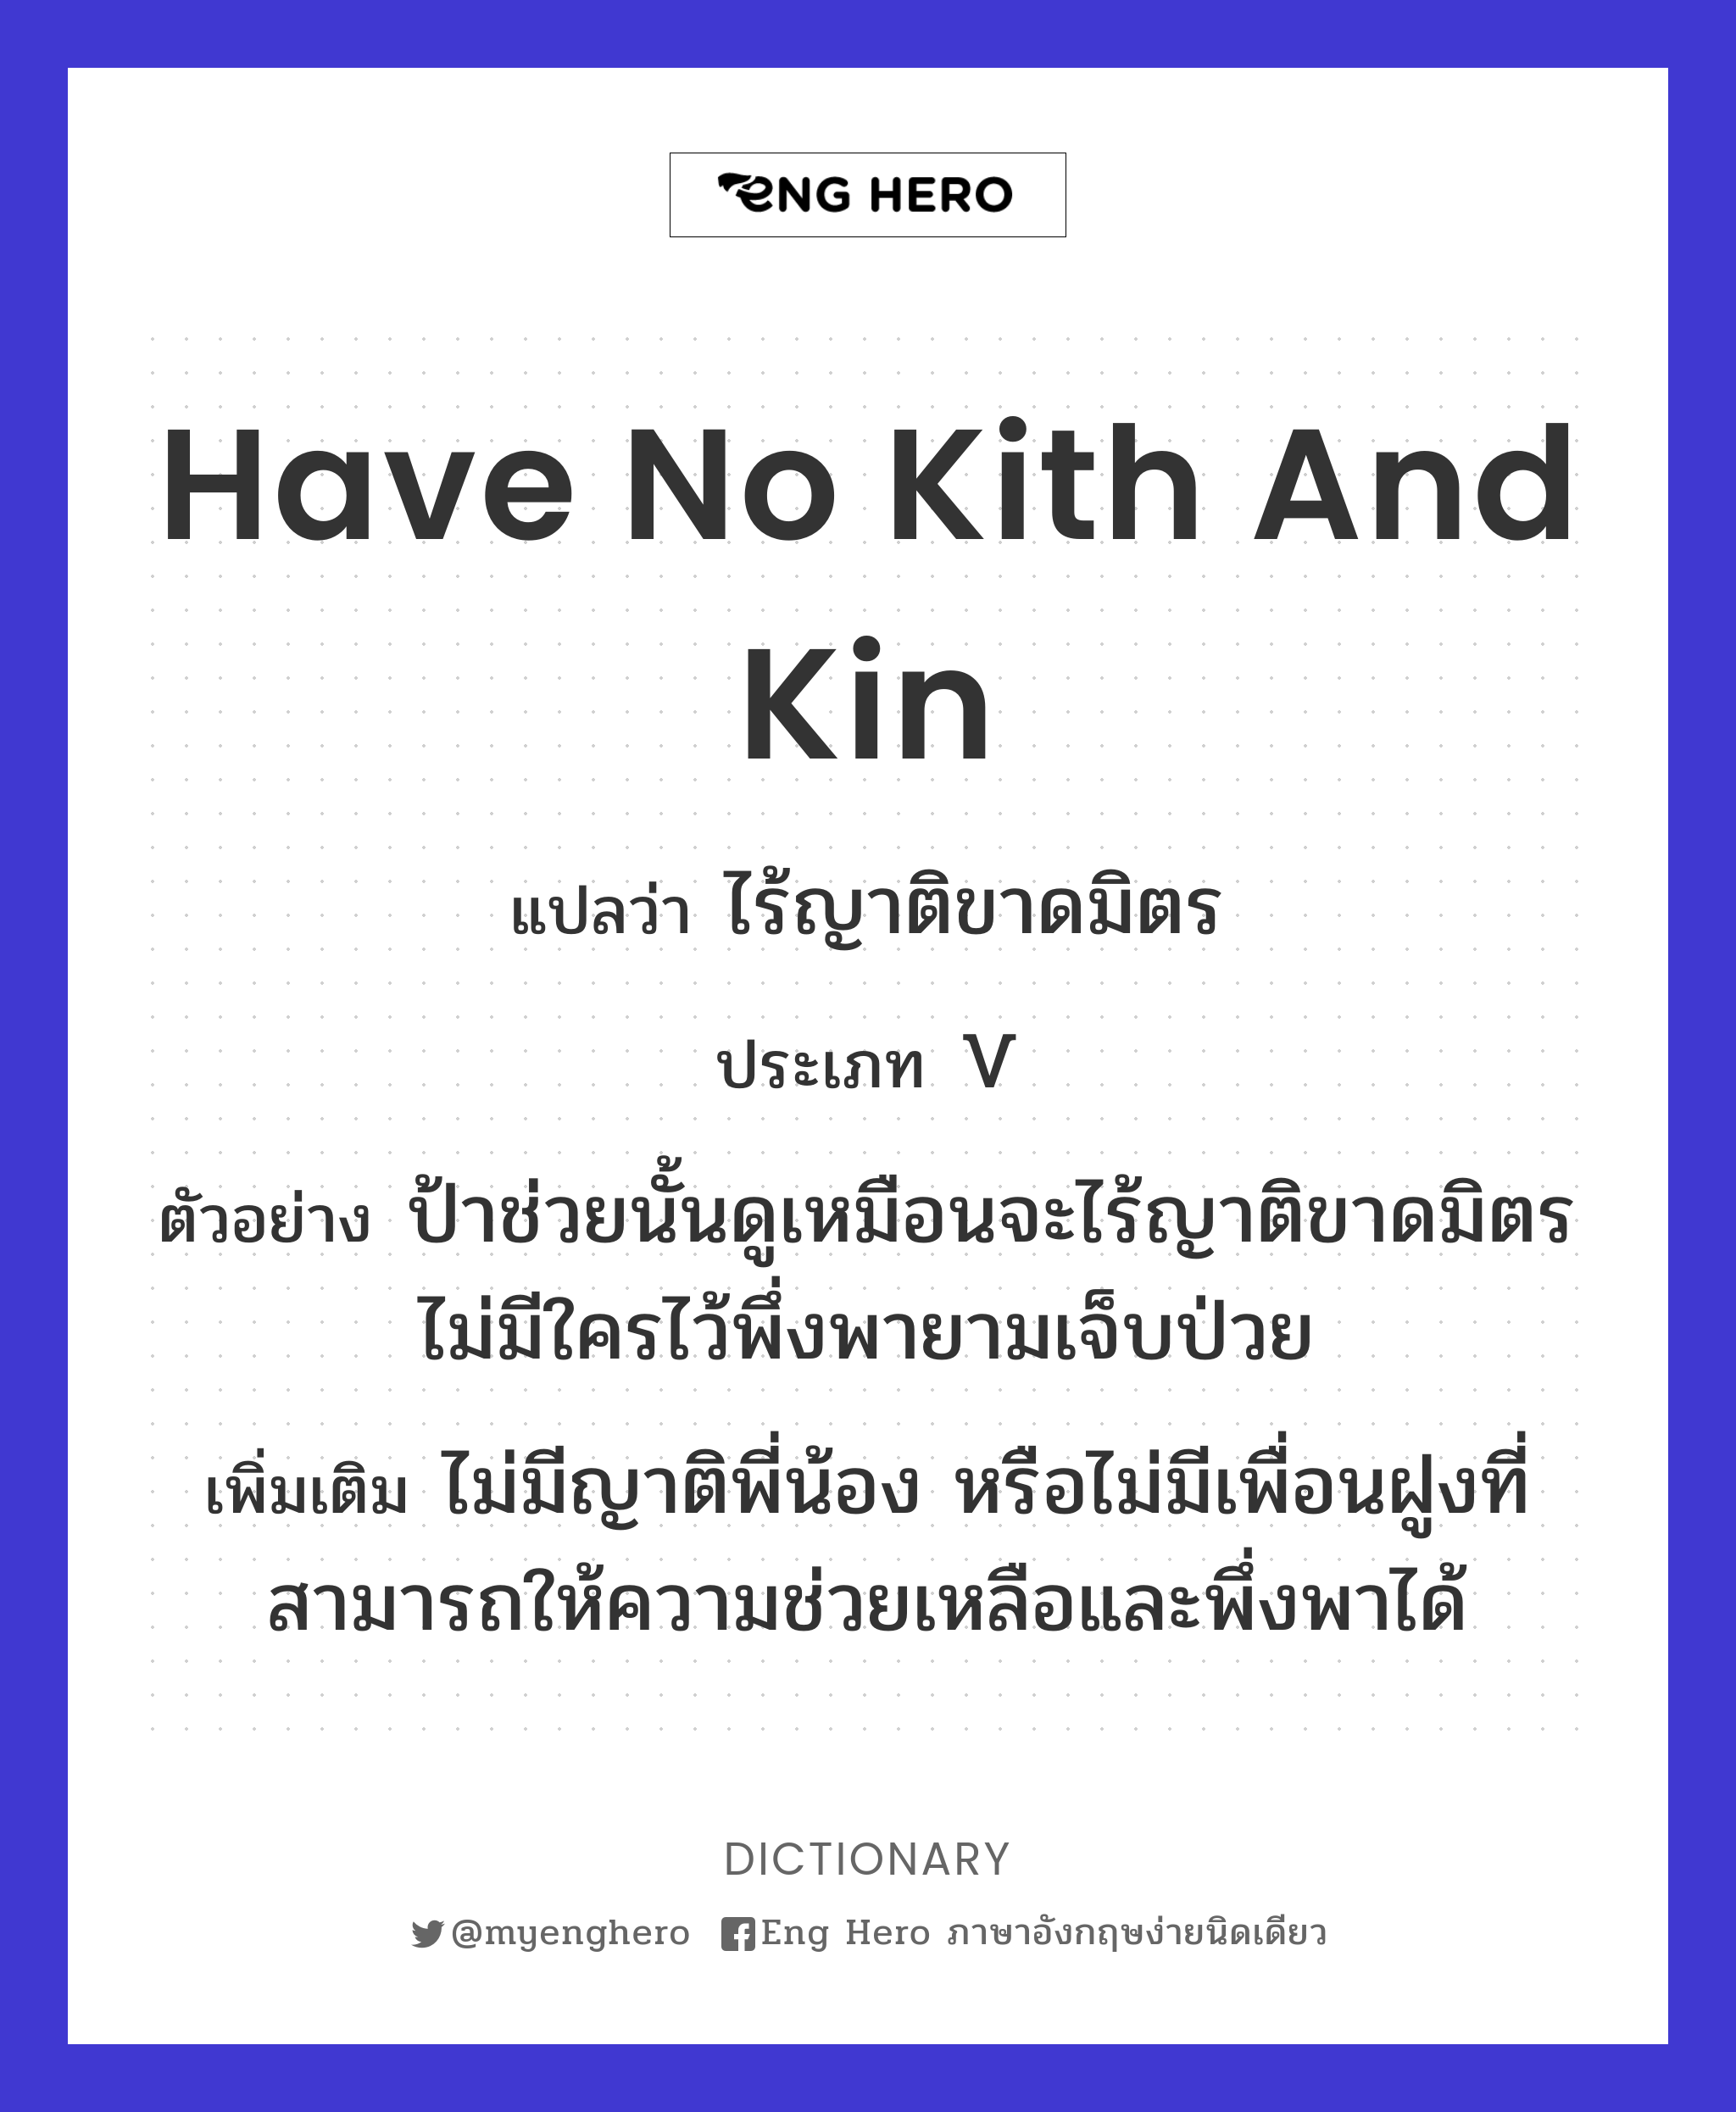 have no kith and kin